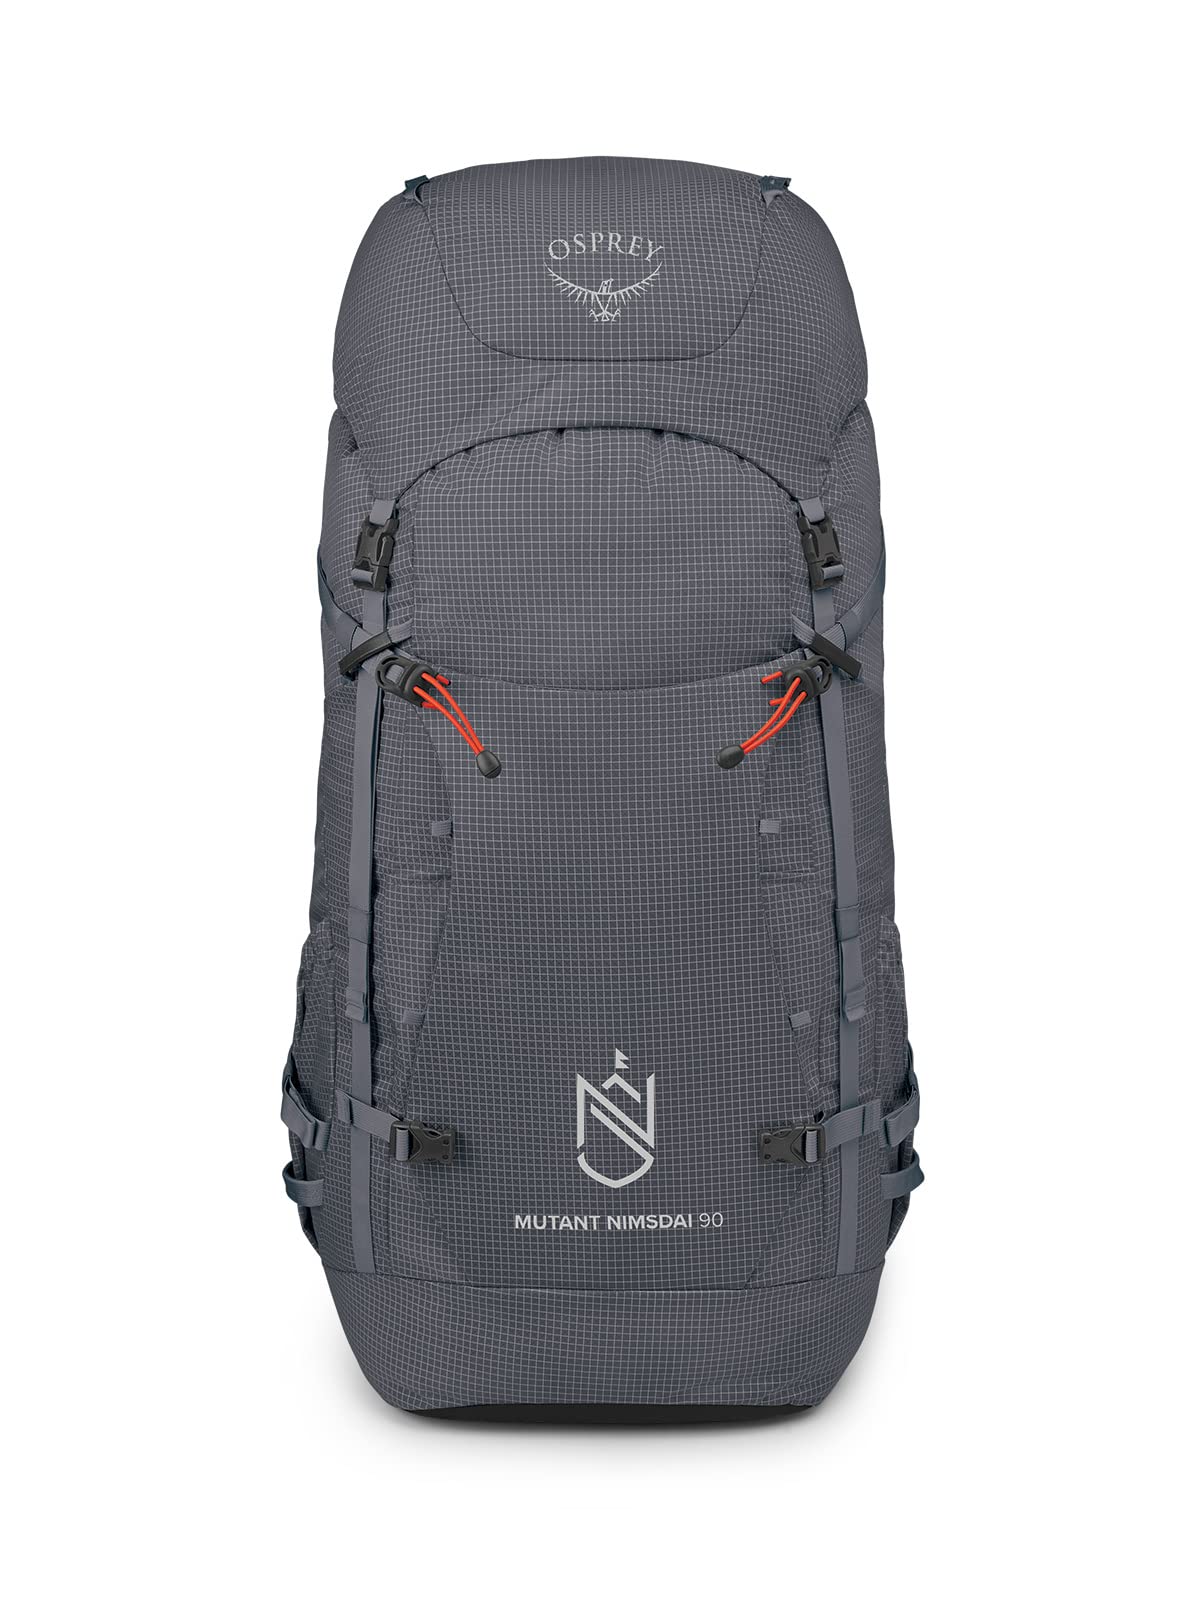 Osprey Nimsdai Mutant 90L Climbing and Mountaineering Unisex Backpack, Tungsten Grey, S/M